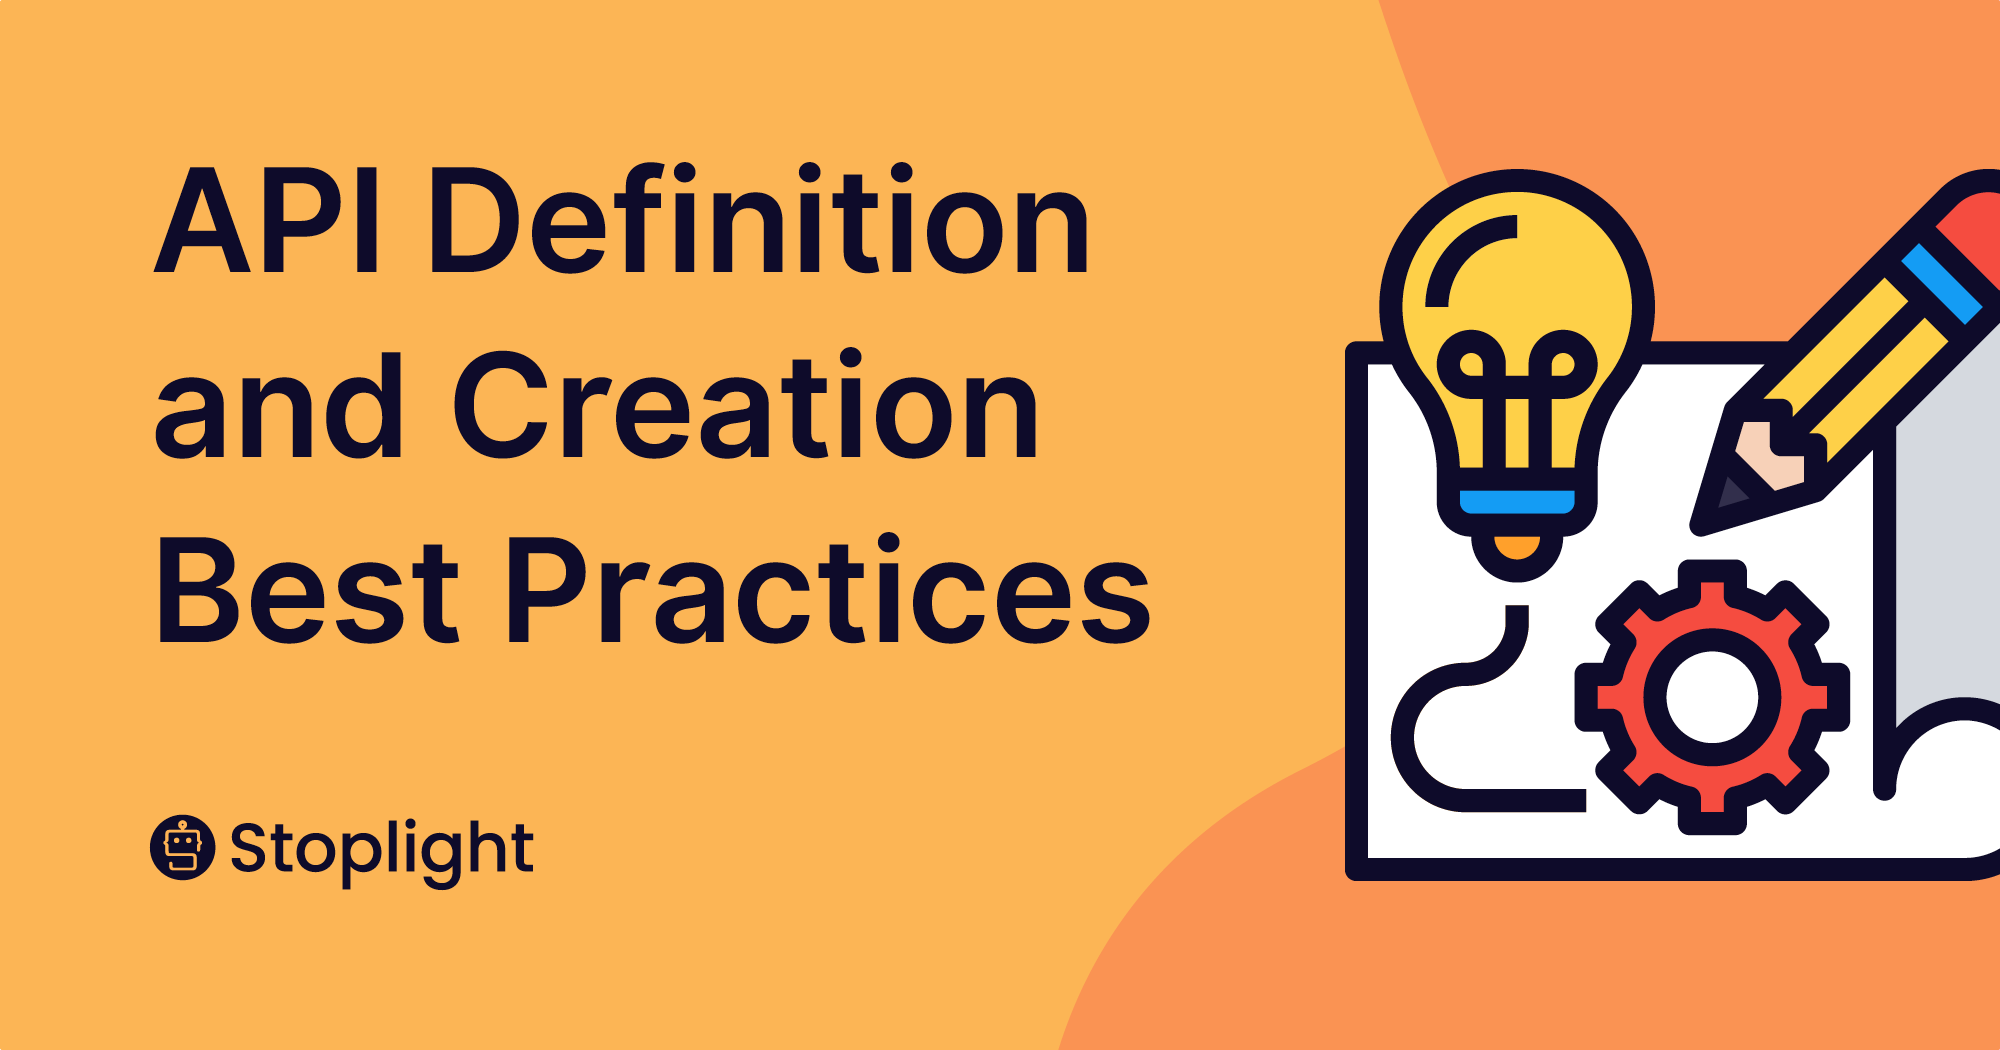 API Definition and Creation Best Practices